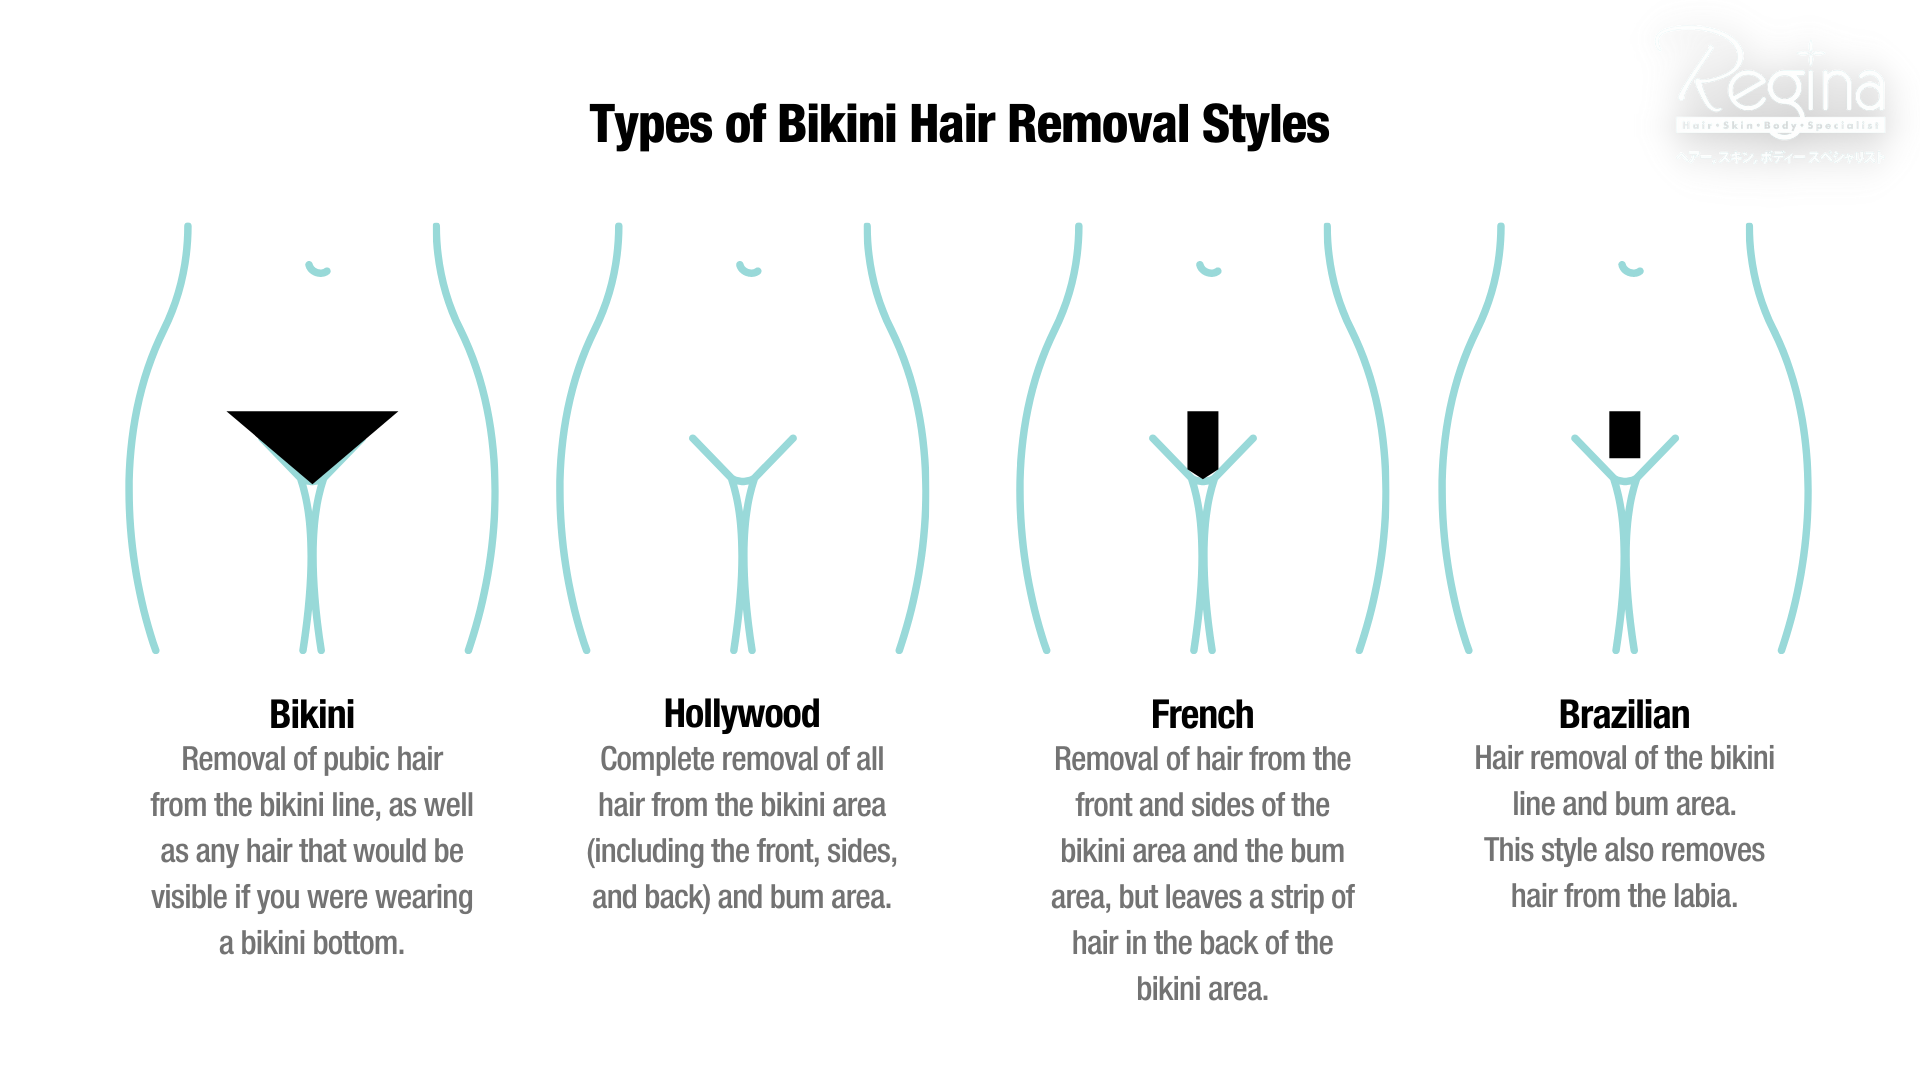 What Are the Differences Between Bikini and Brazilian Laser Hair